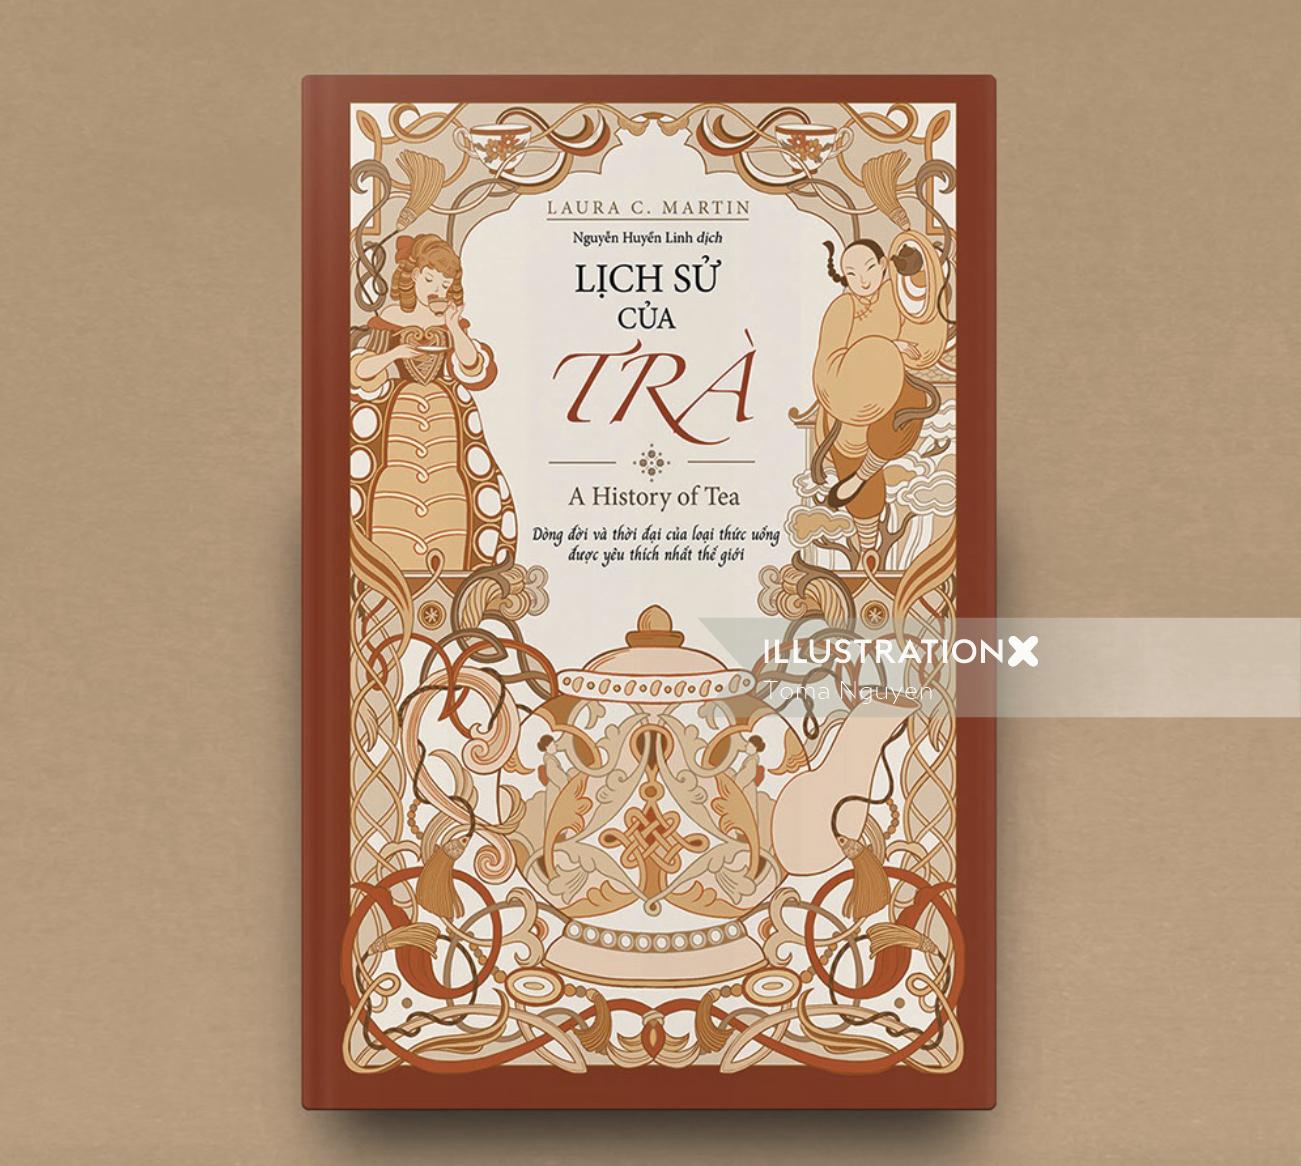 Tra - A History of Tea book cover for Huy Hoang